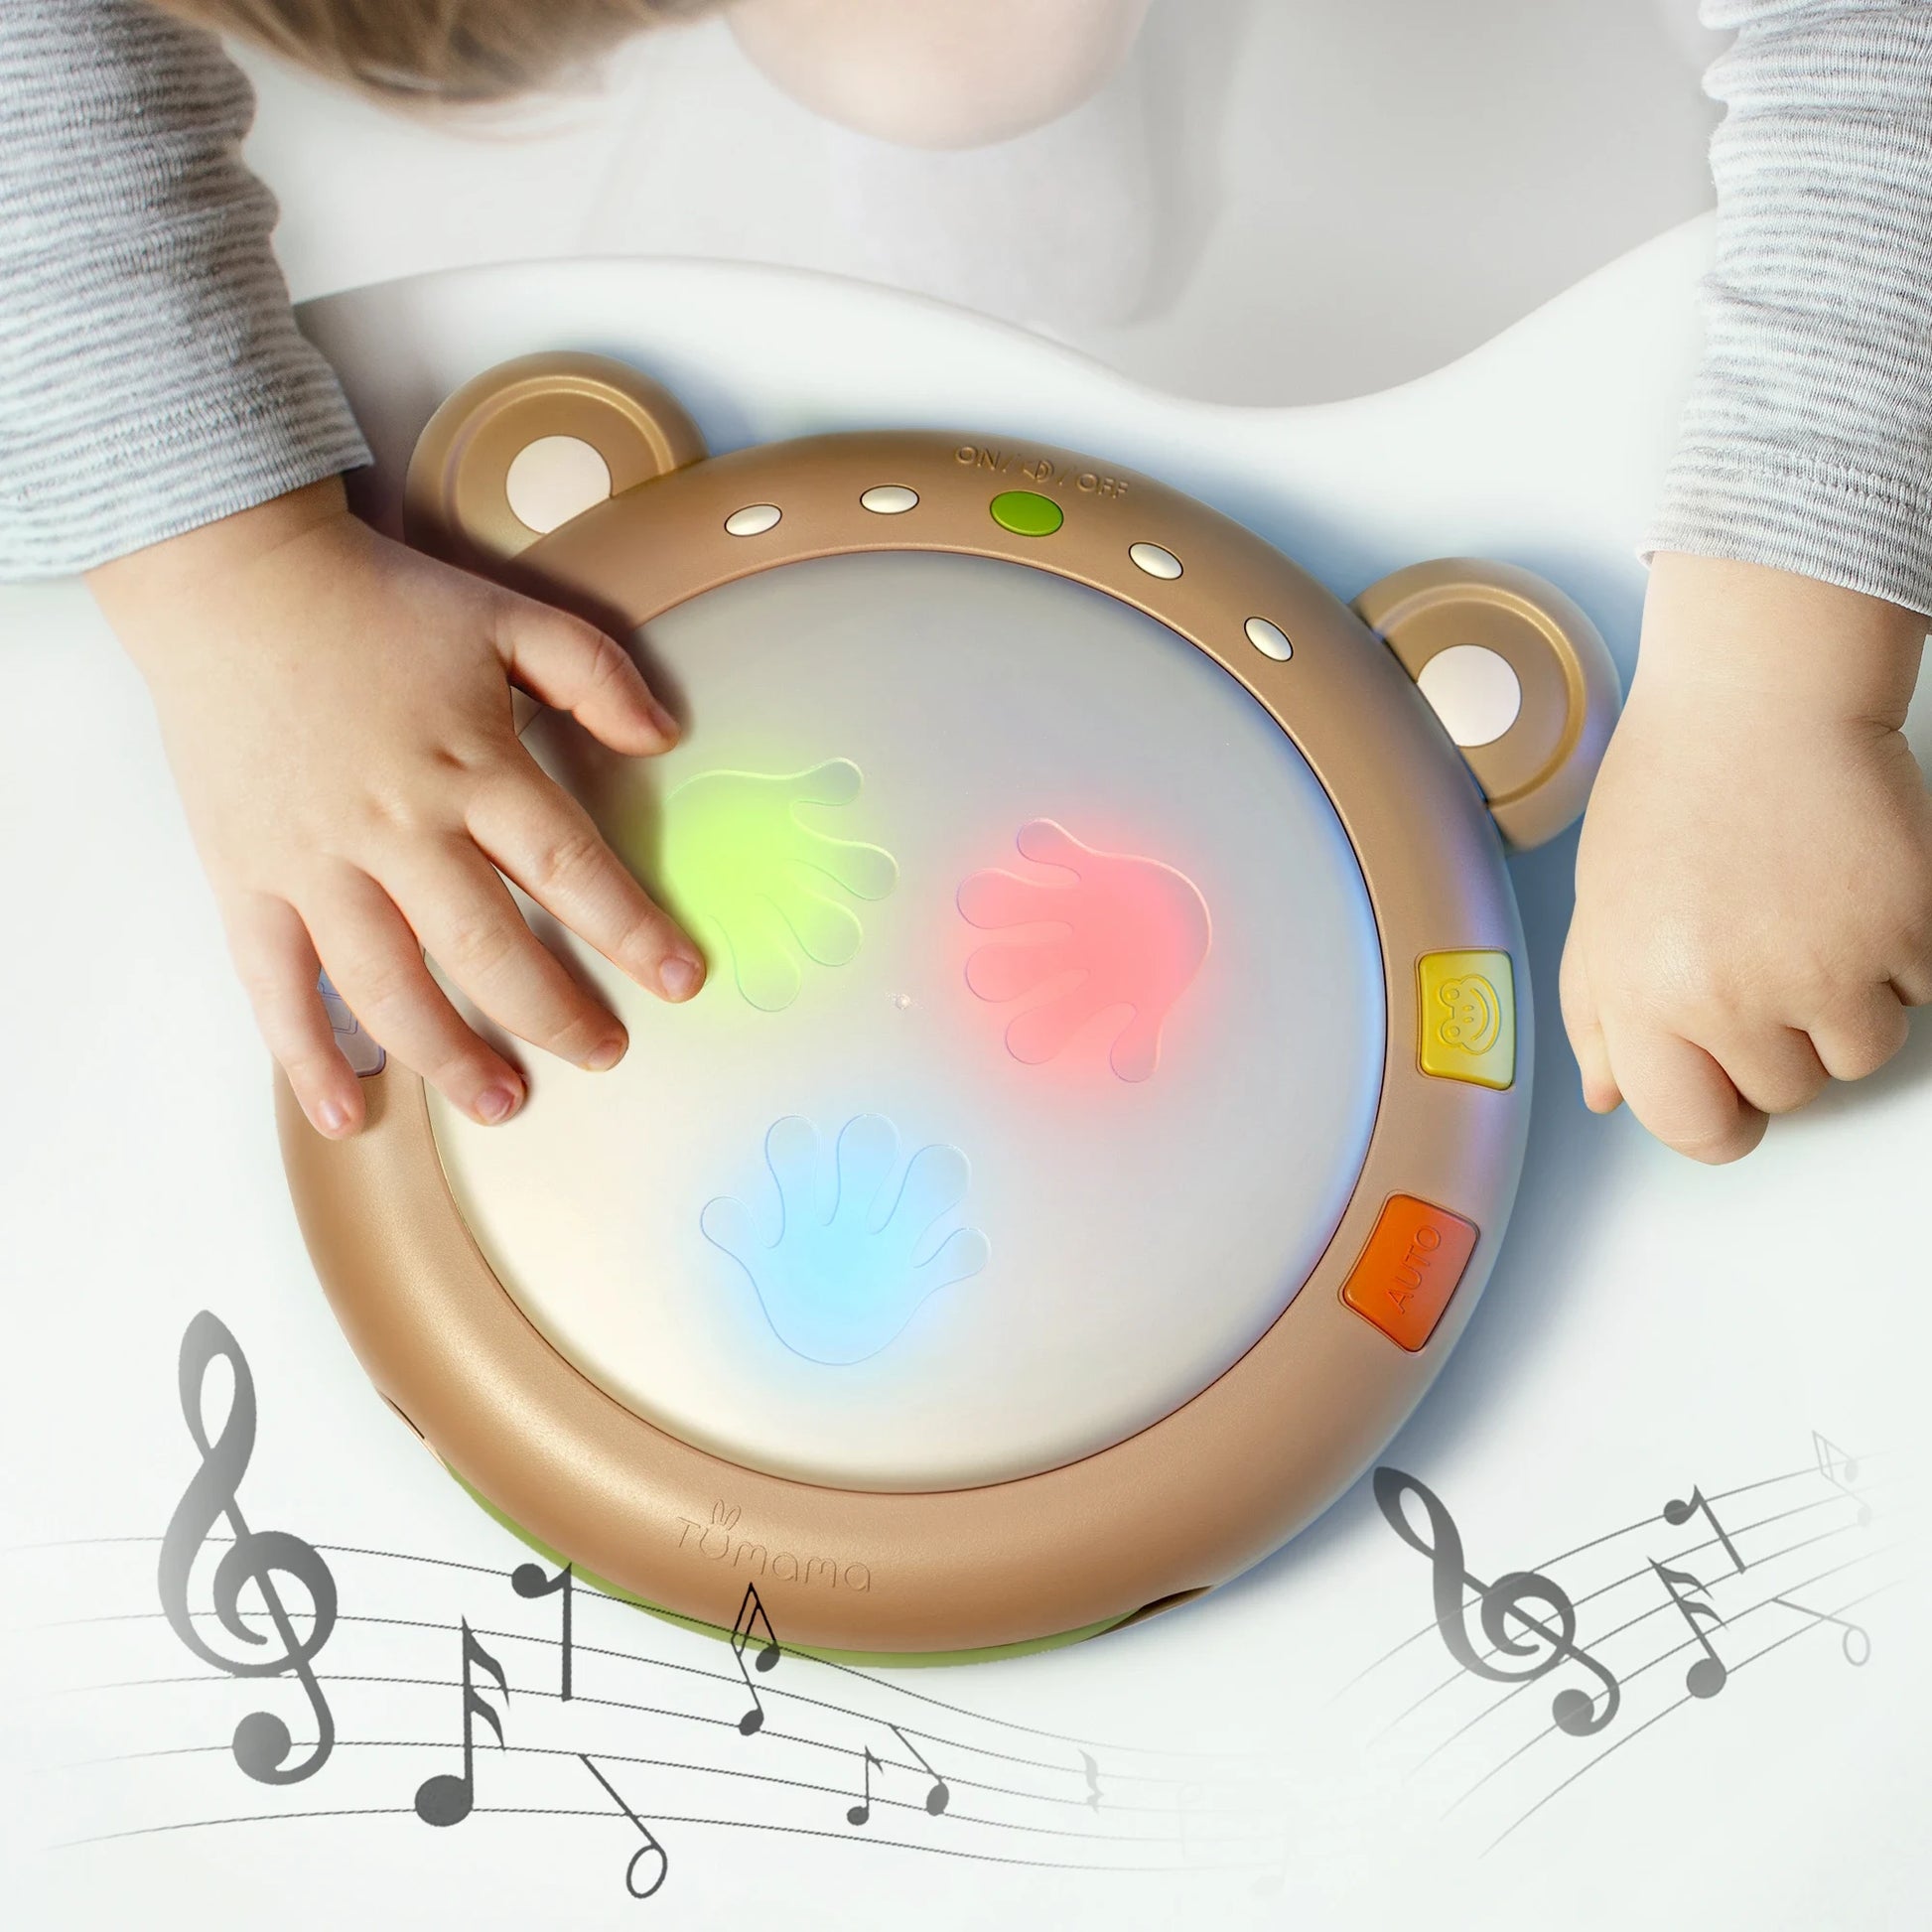 Toddler's electronic toy for musical play